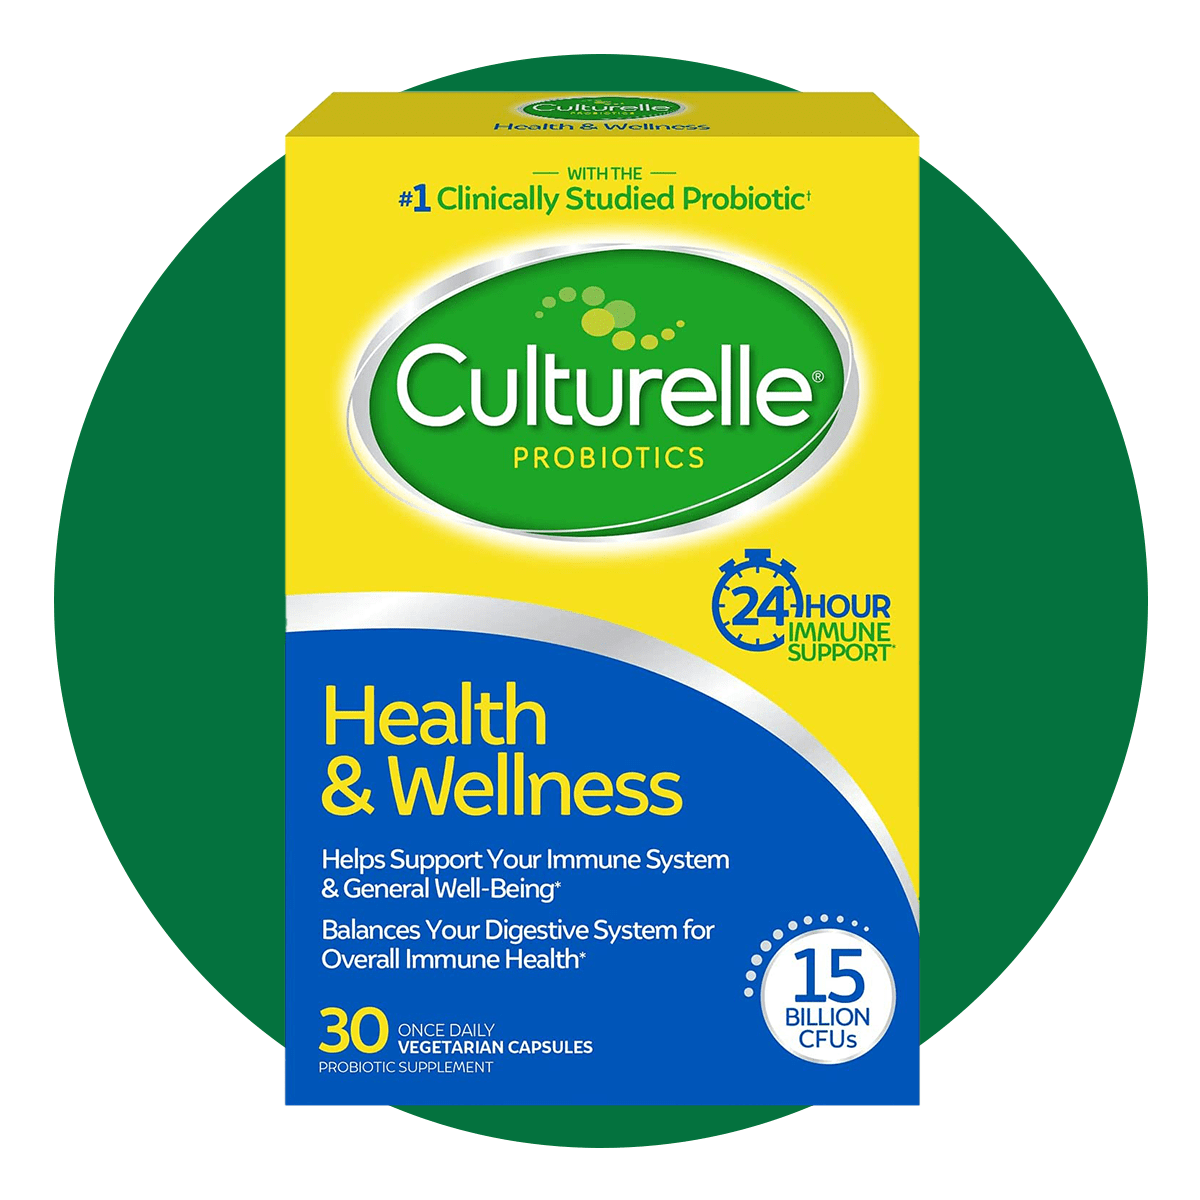 Culturelle Probiotic: Why It's the Best, Say Many Shoppers and Nutrition Pros